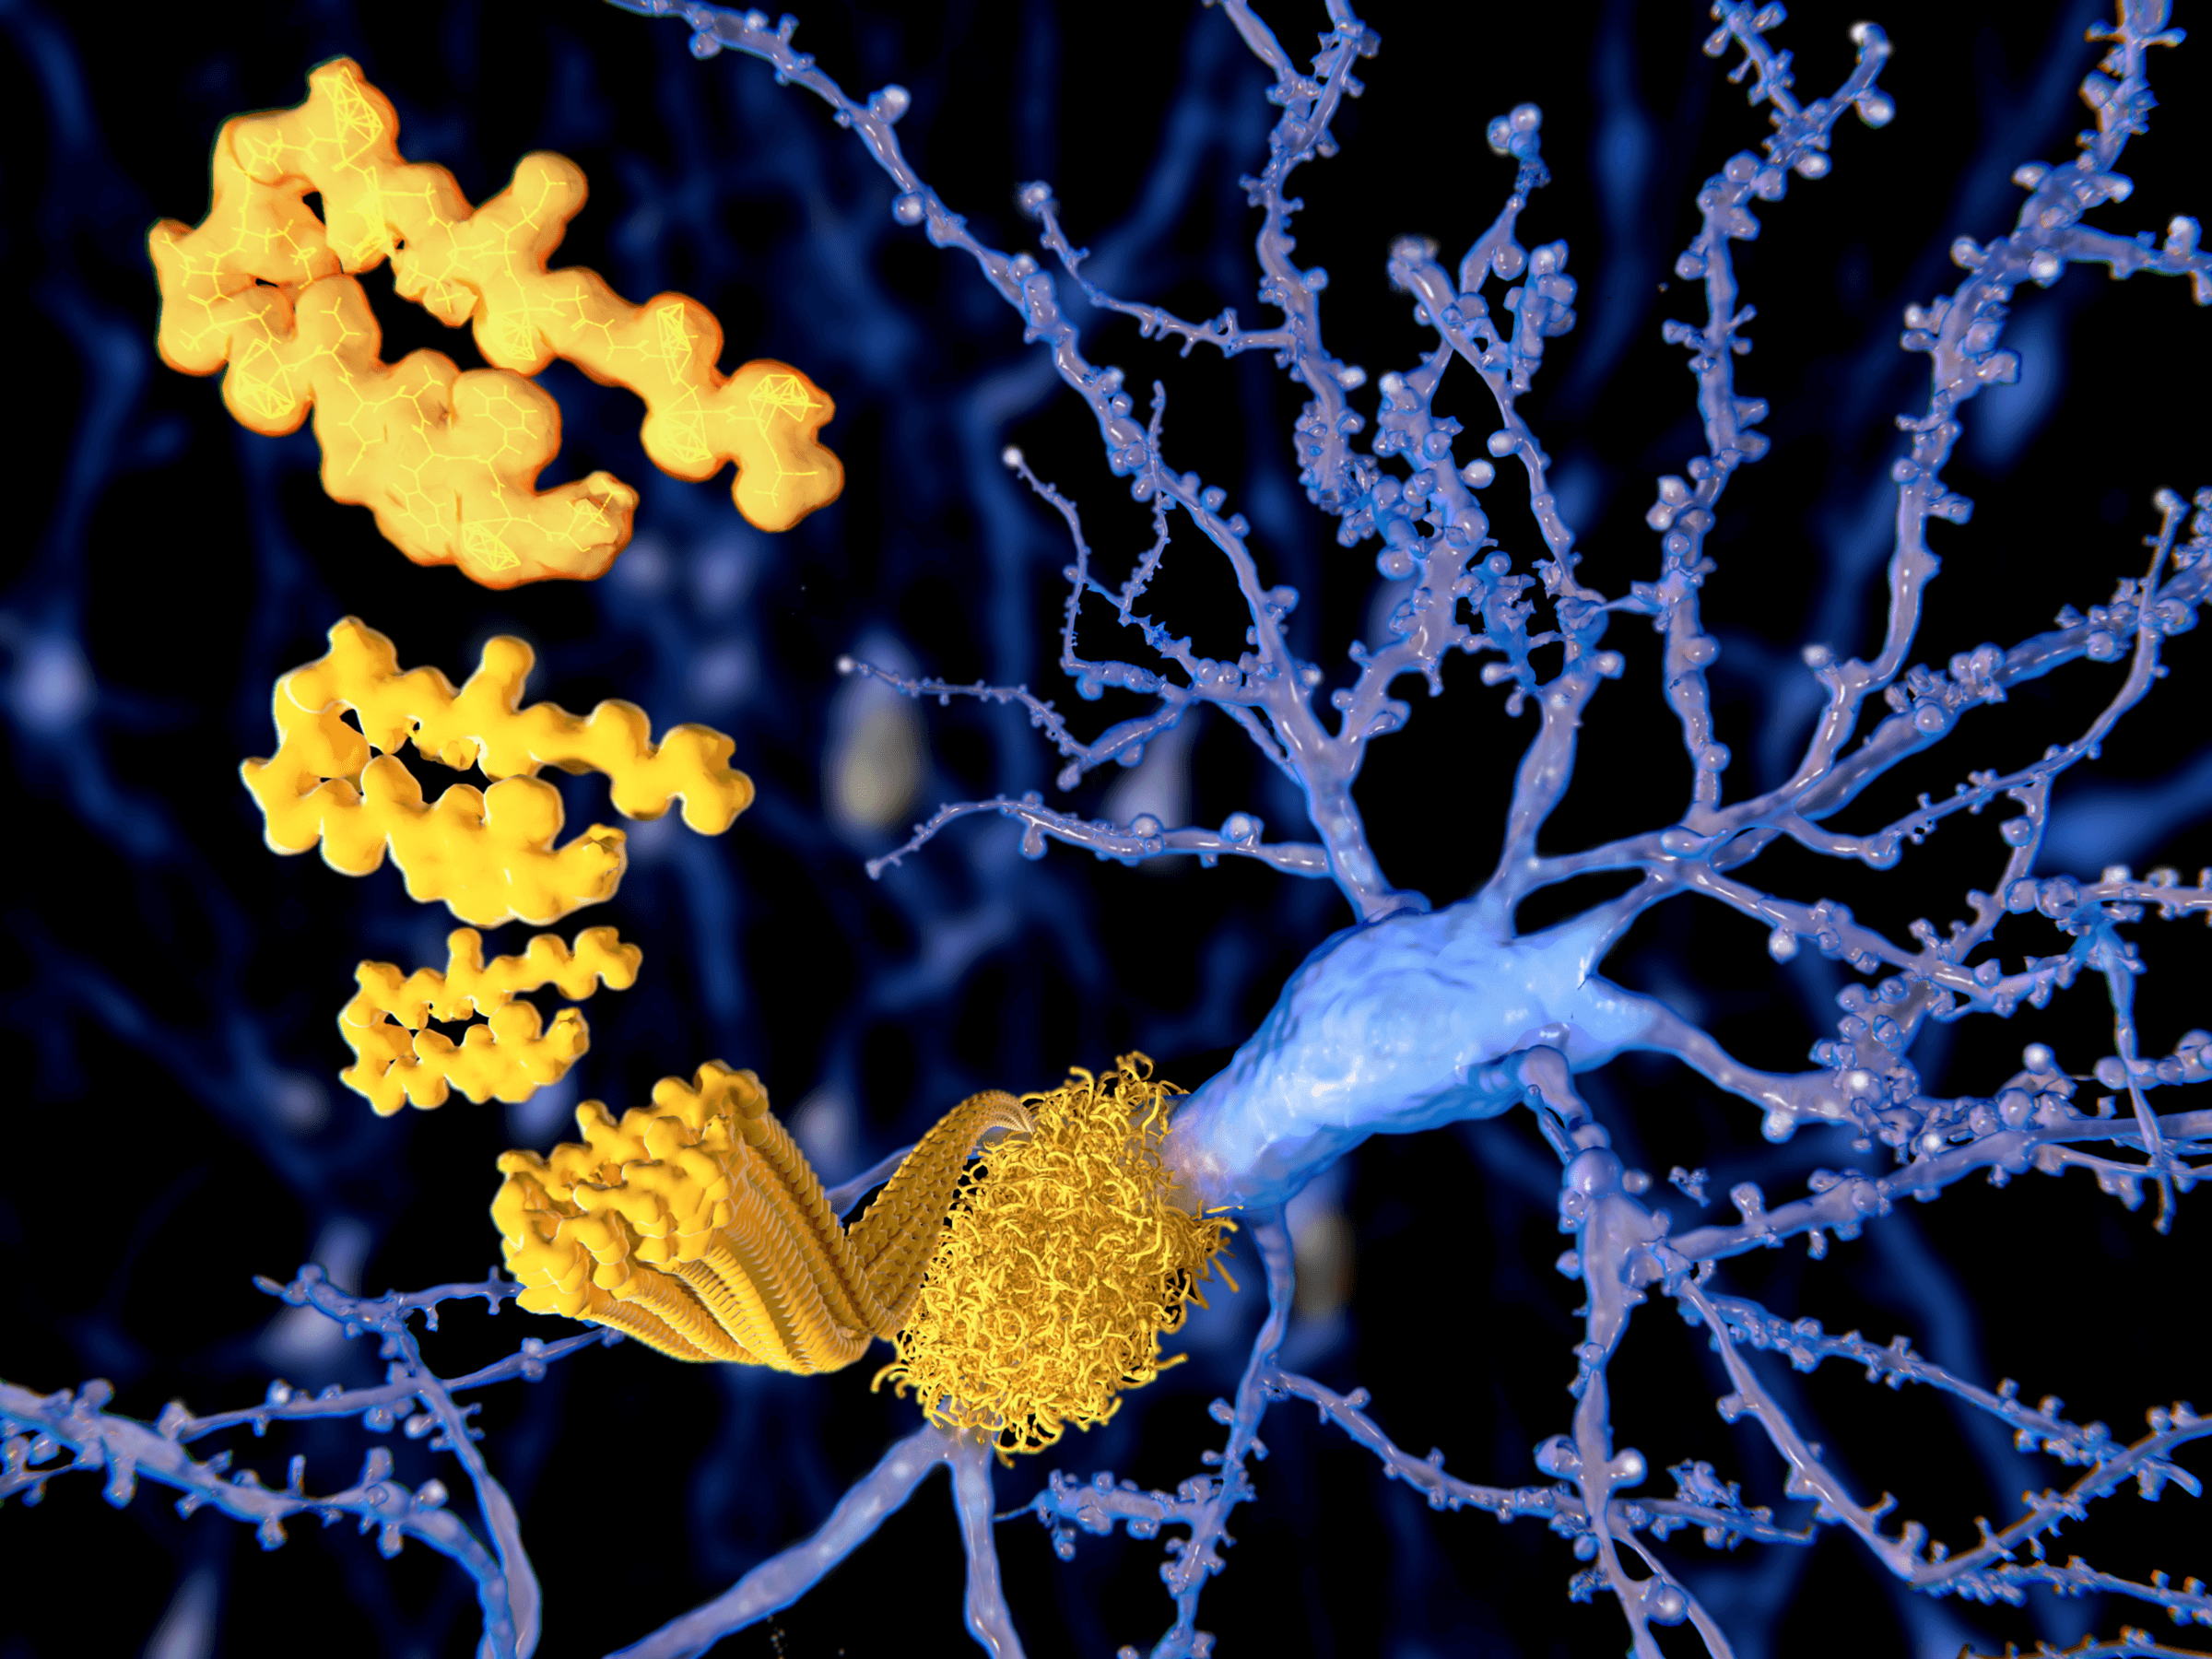 image of amyloid plaque